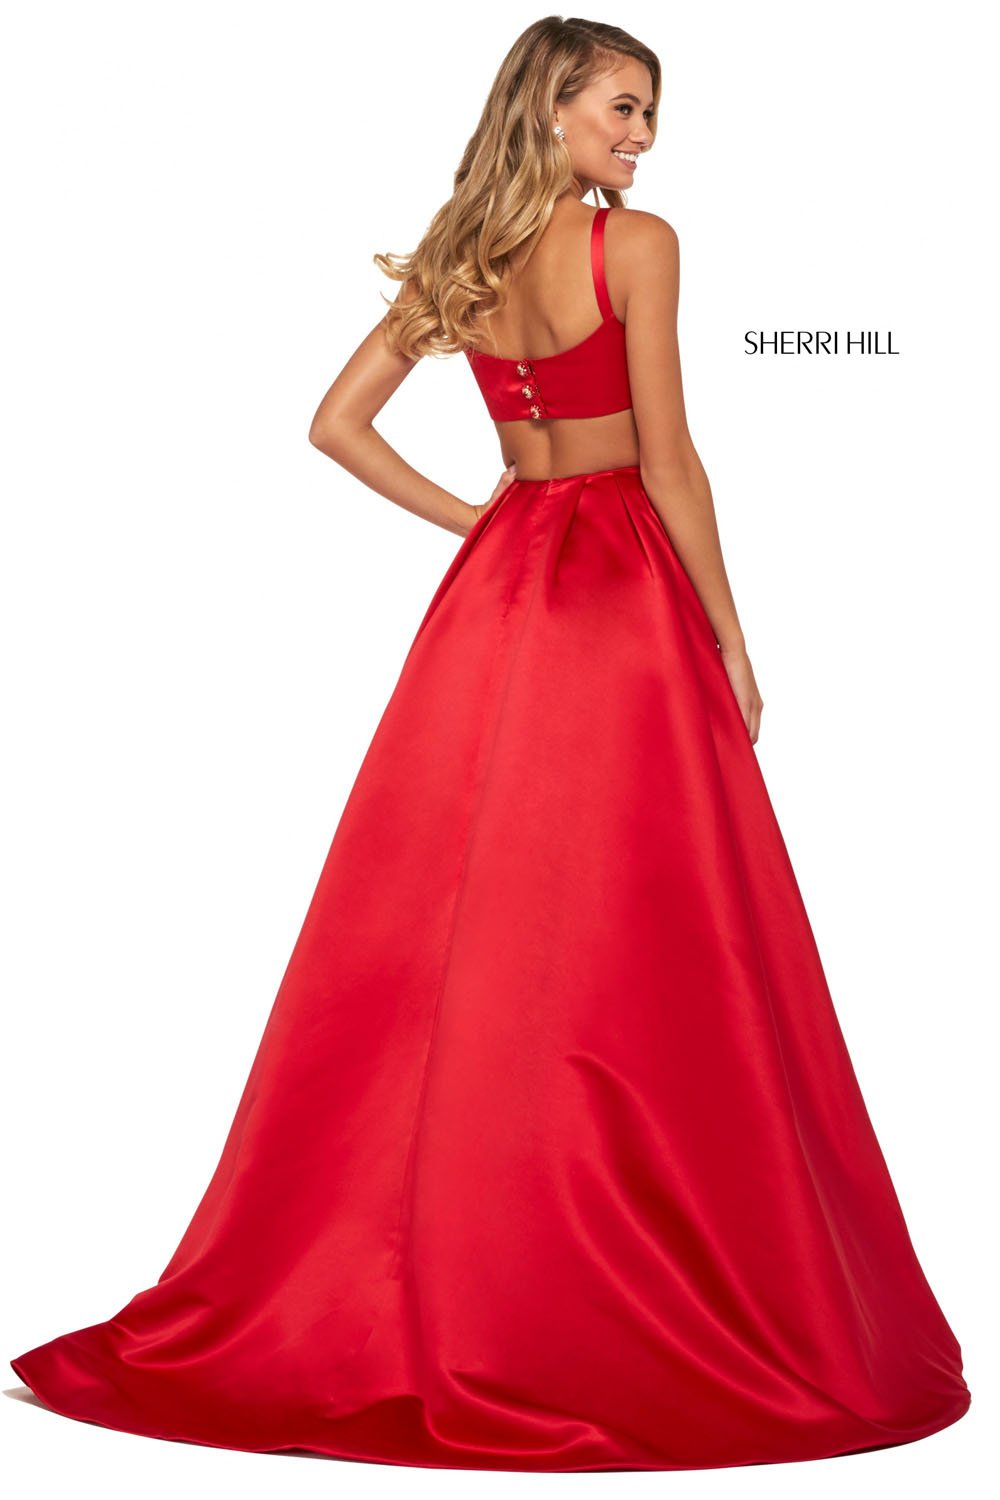 Sherri Hill 53316 dress images in these colors: Candy Pink, Ivory, Lilac, Emerald, Blush, Light Blue, Royal, Red.